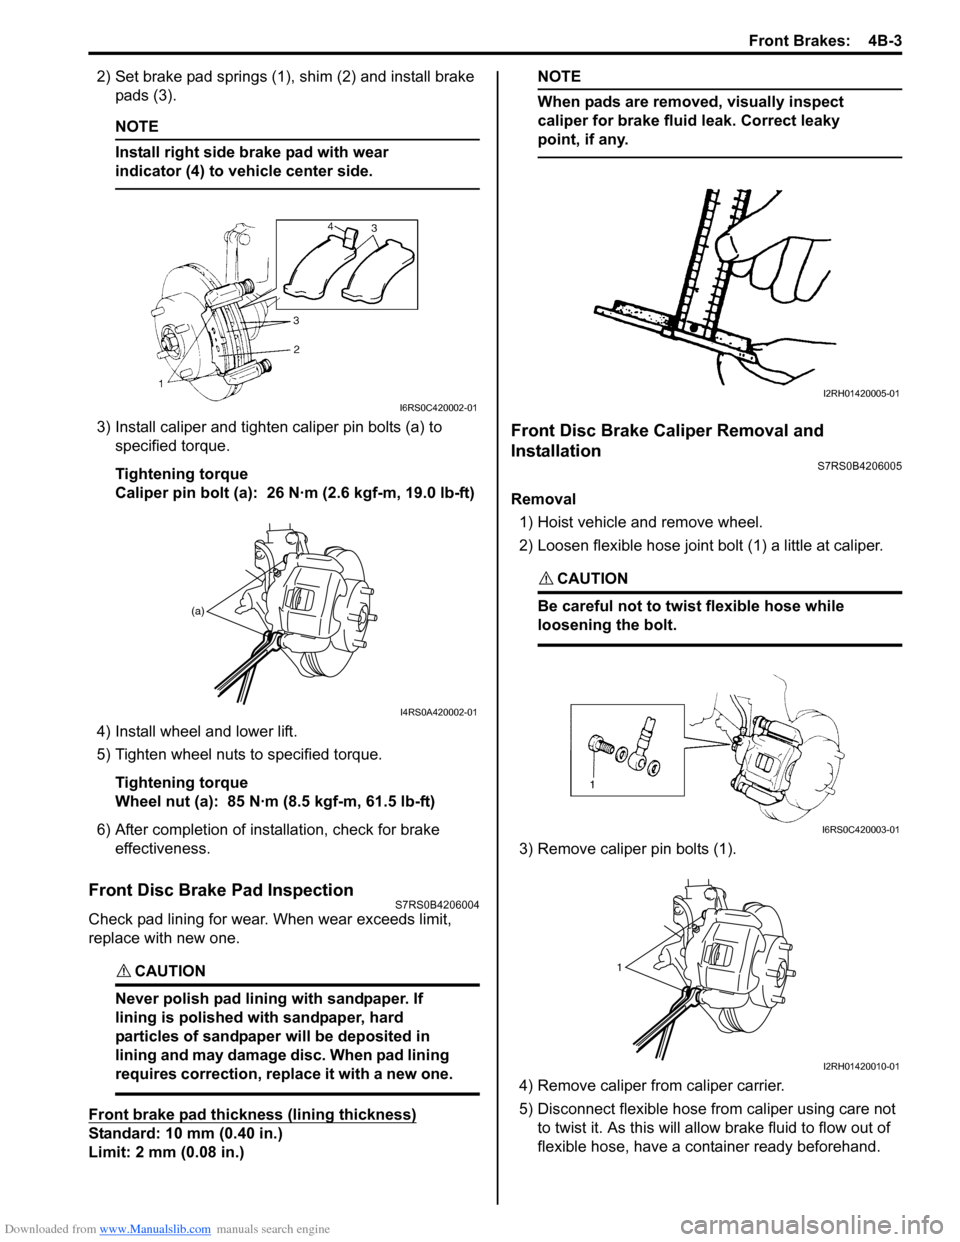 SUZUKI SWIFT 2006 2.G Service Service Manual Downloaded from www.Manualslib.com manuals search engine Front Brakes:  4B-3
2) Set brake pad springs (1), shim (2) and install brake pads (3).
NOTE
Install right side brake pad with wear 
indicator (